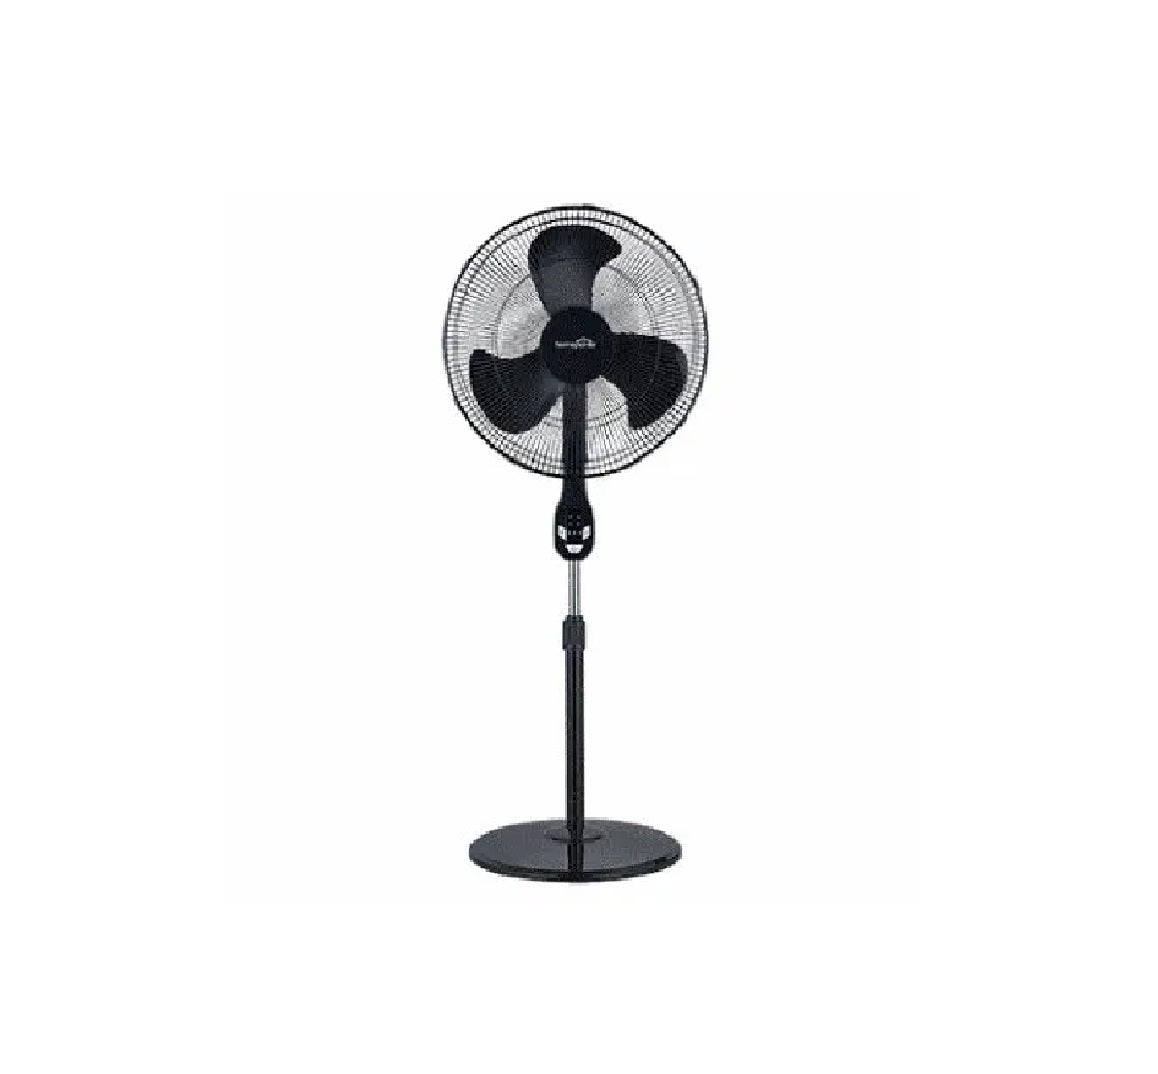 Homepointe FS45-18UR 3-Speed Stand Fan with Remote, 18"